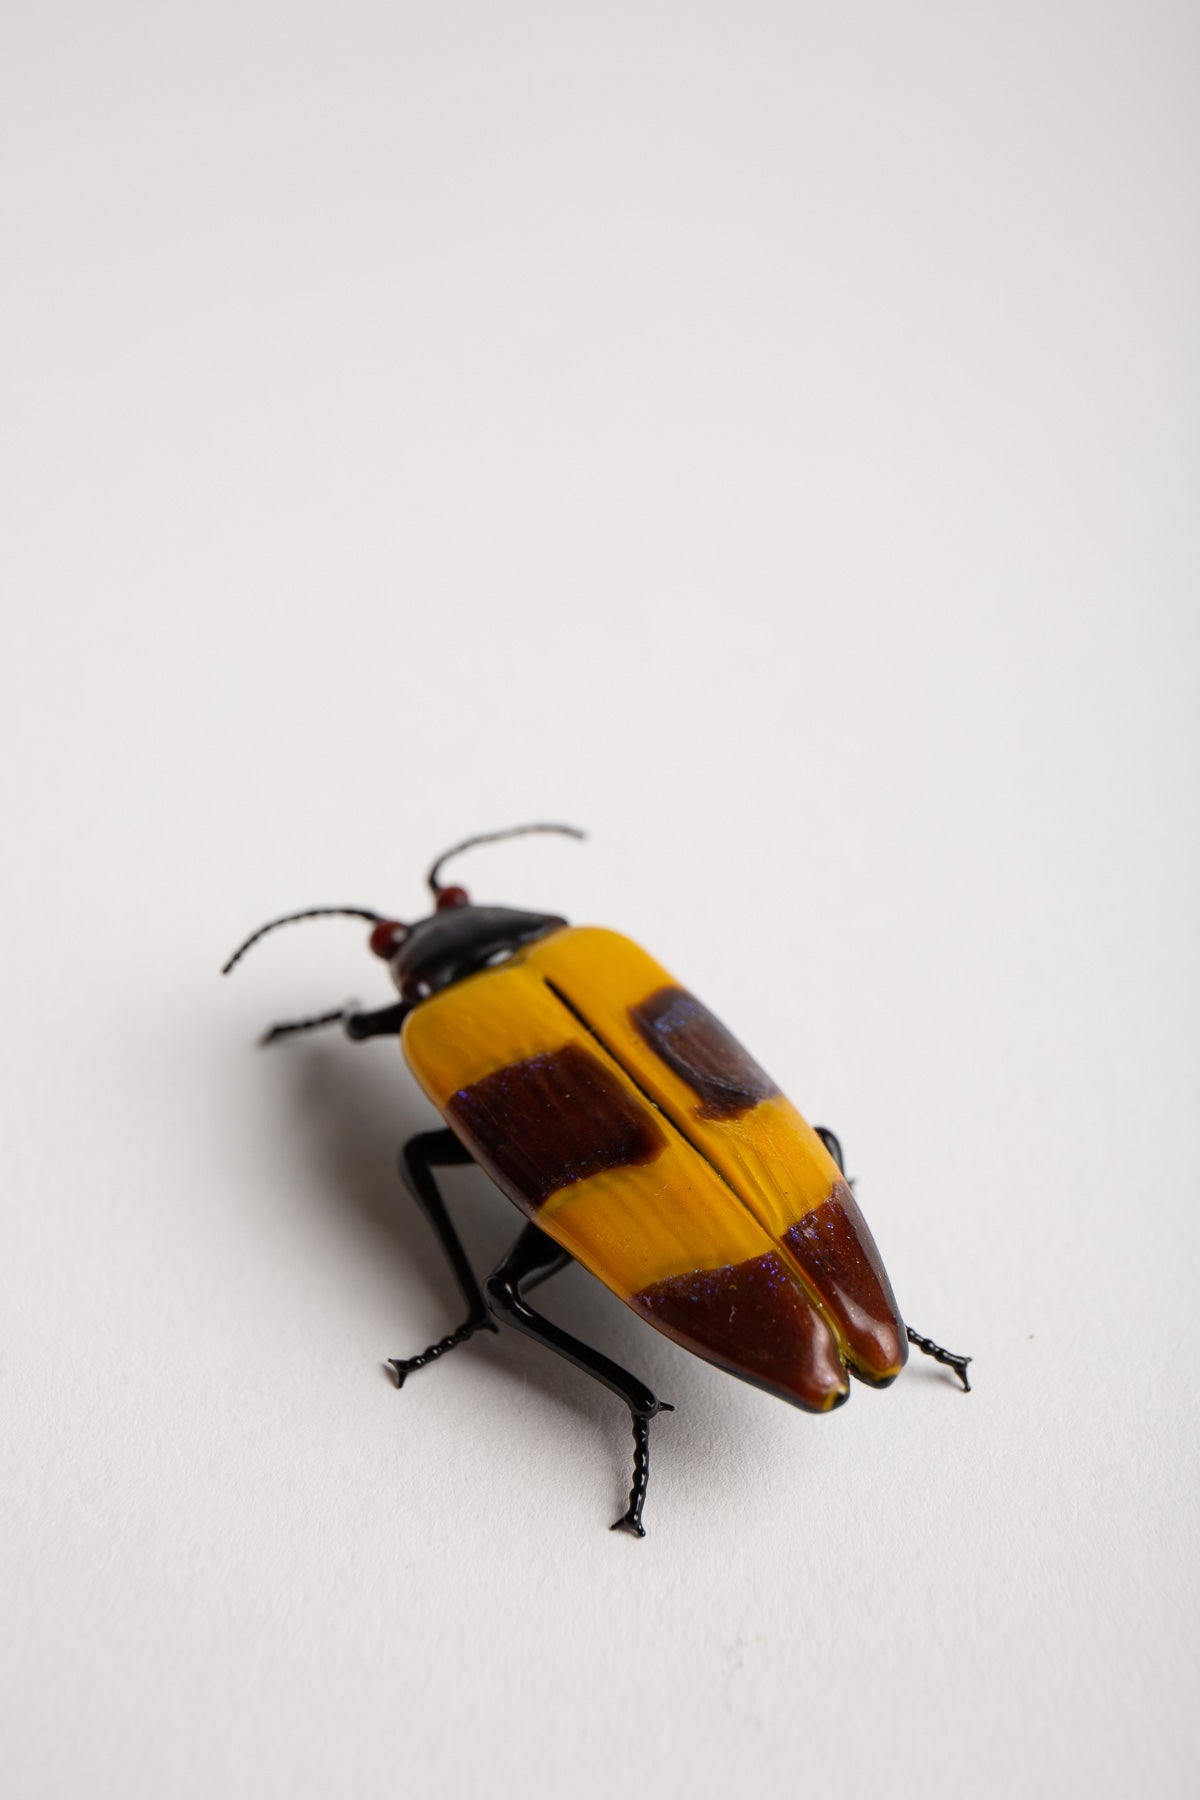 MAXFIELD PRIVATE COLLECTION | STRIPED BEETLE